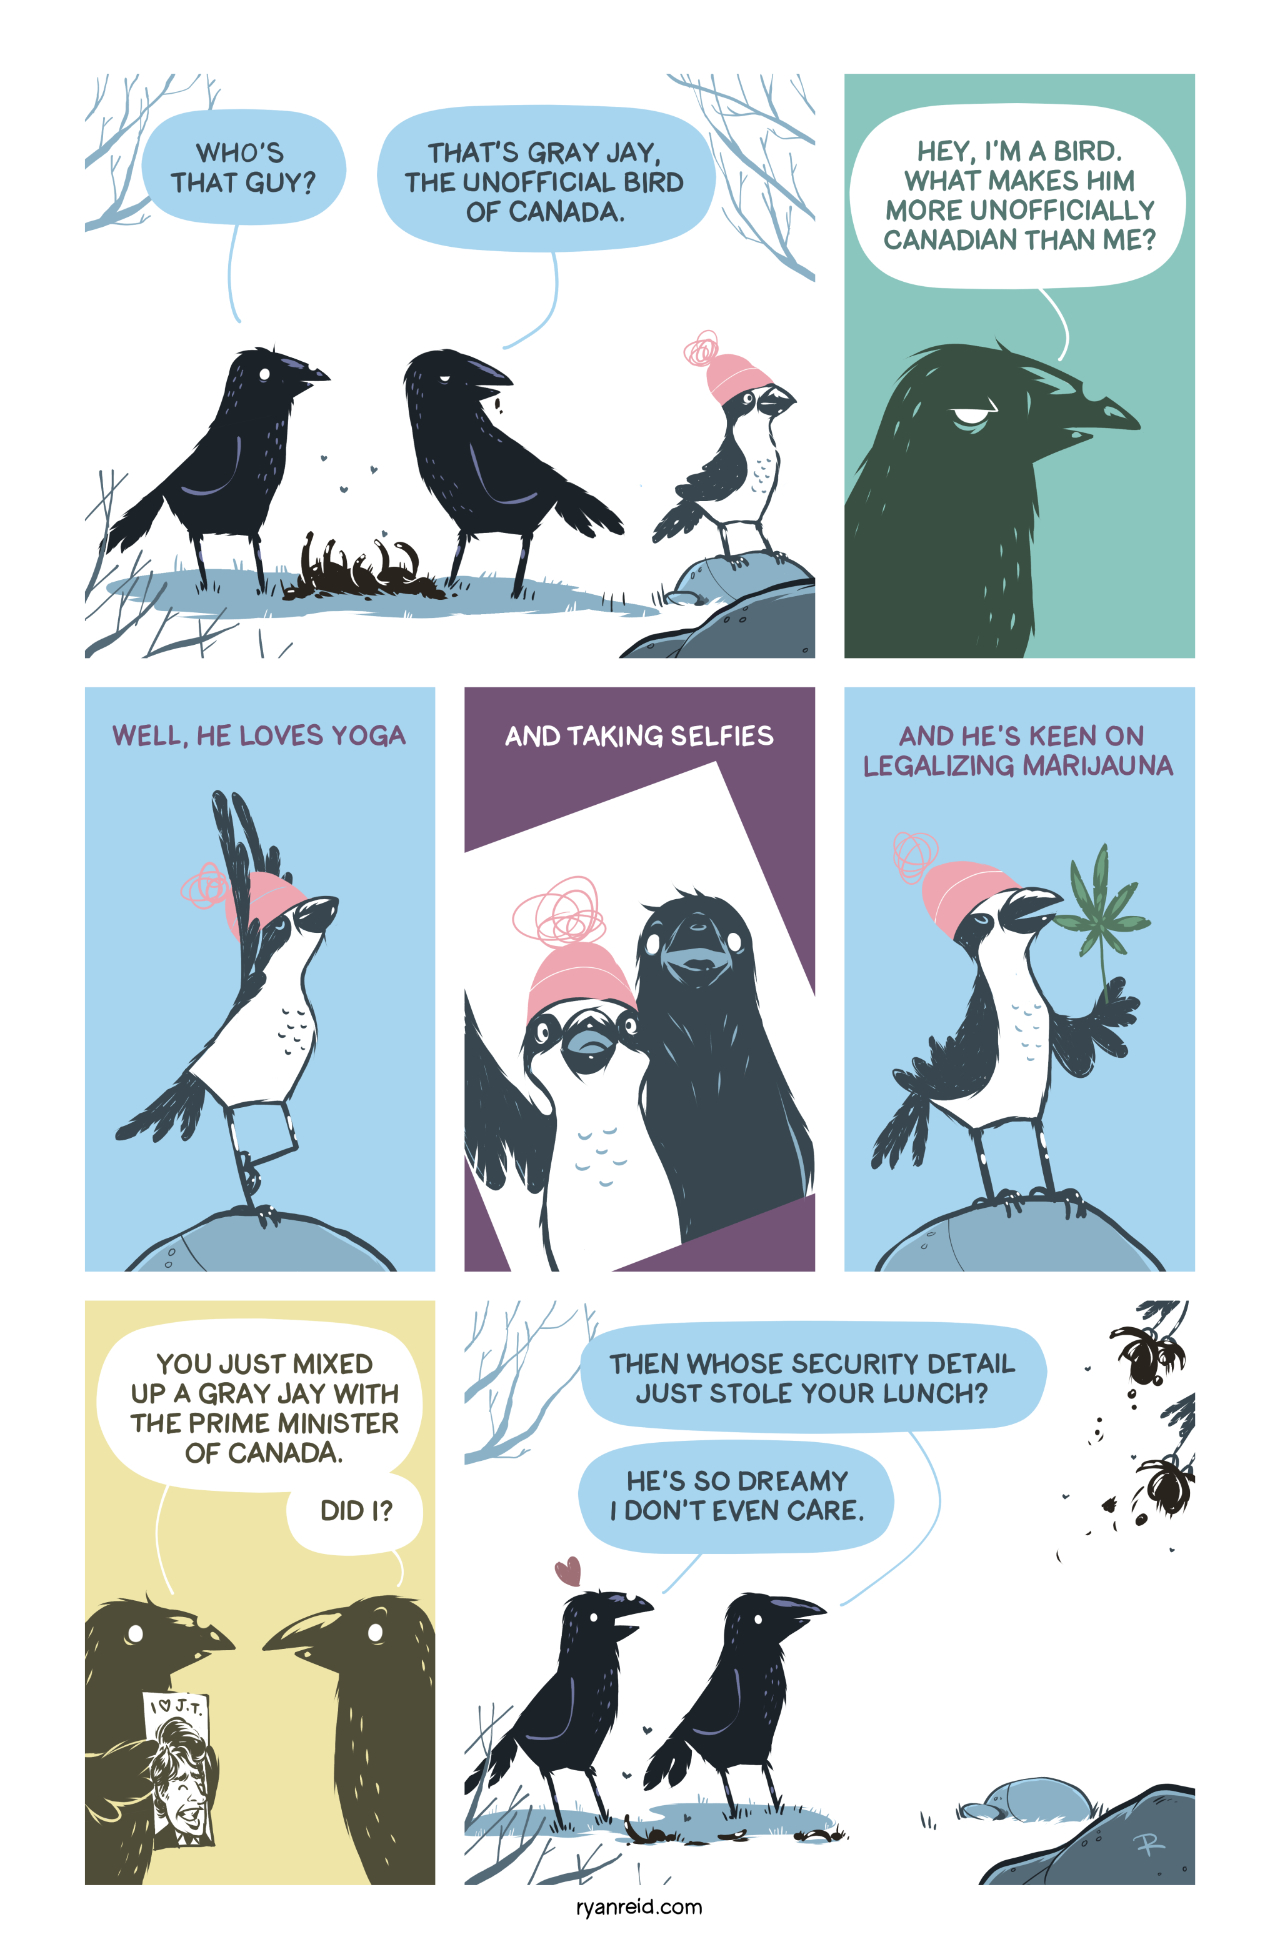 In this comic, the crows mistake the Gray Jay, the unofficial bird of Canada, with another famous Canadian.